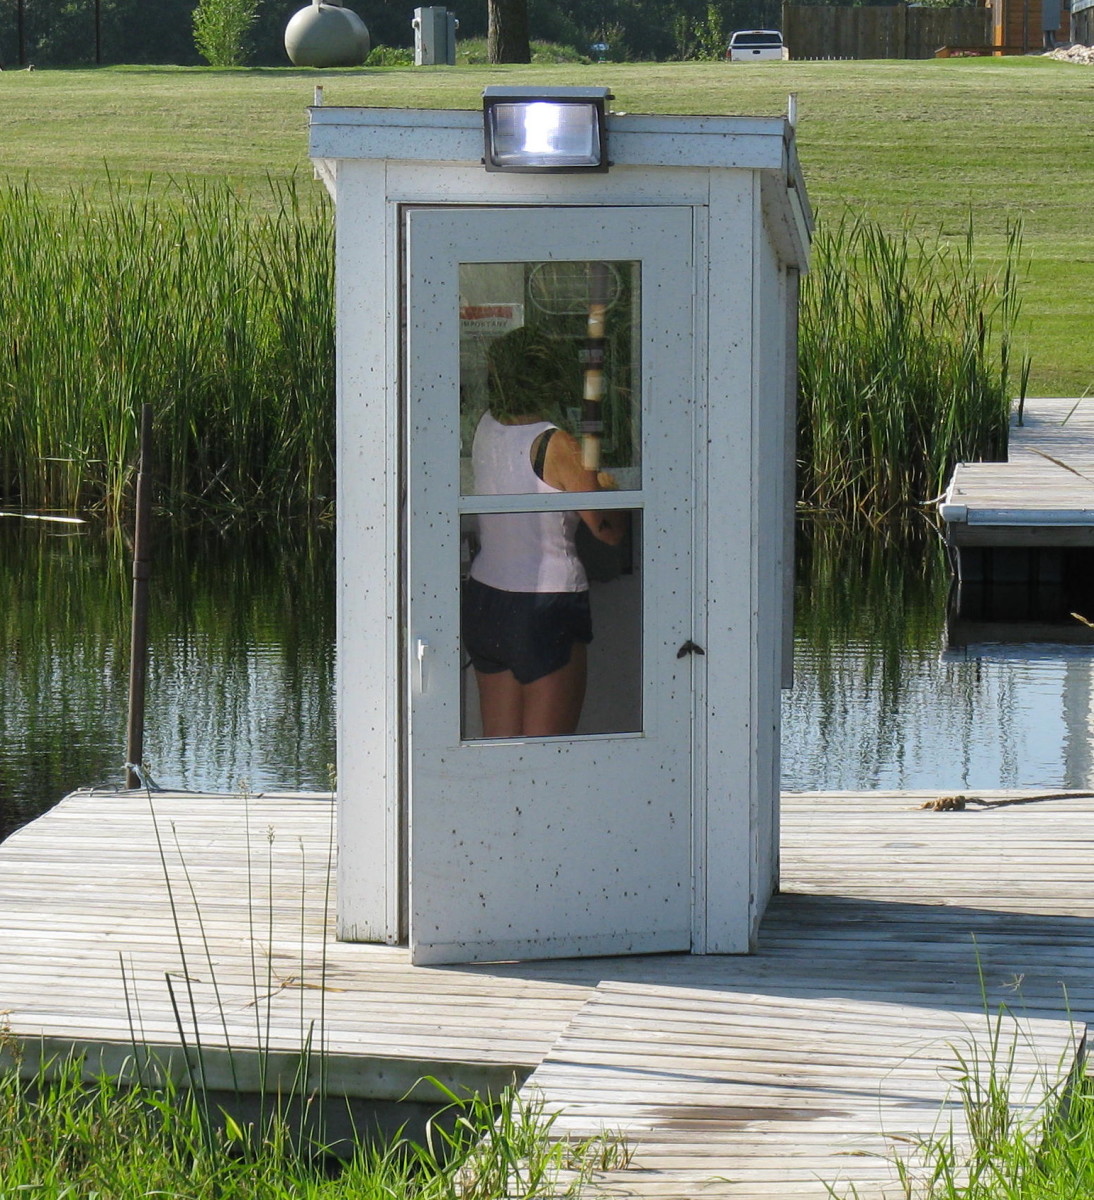 Registering a Boat at this Phone Booth